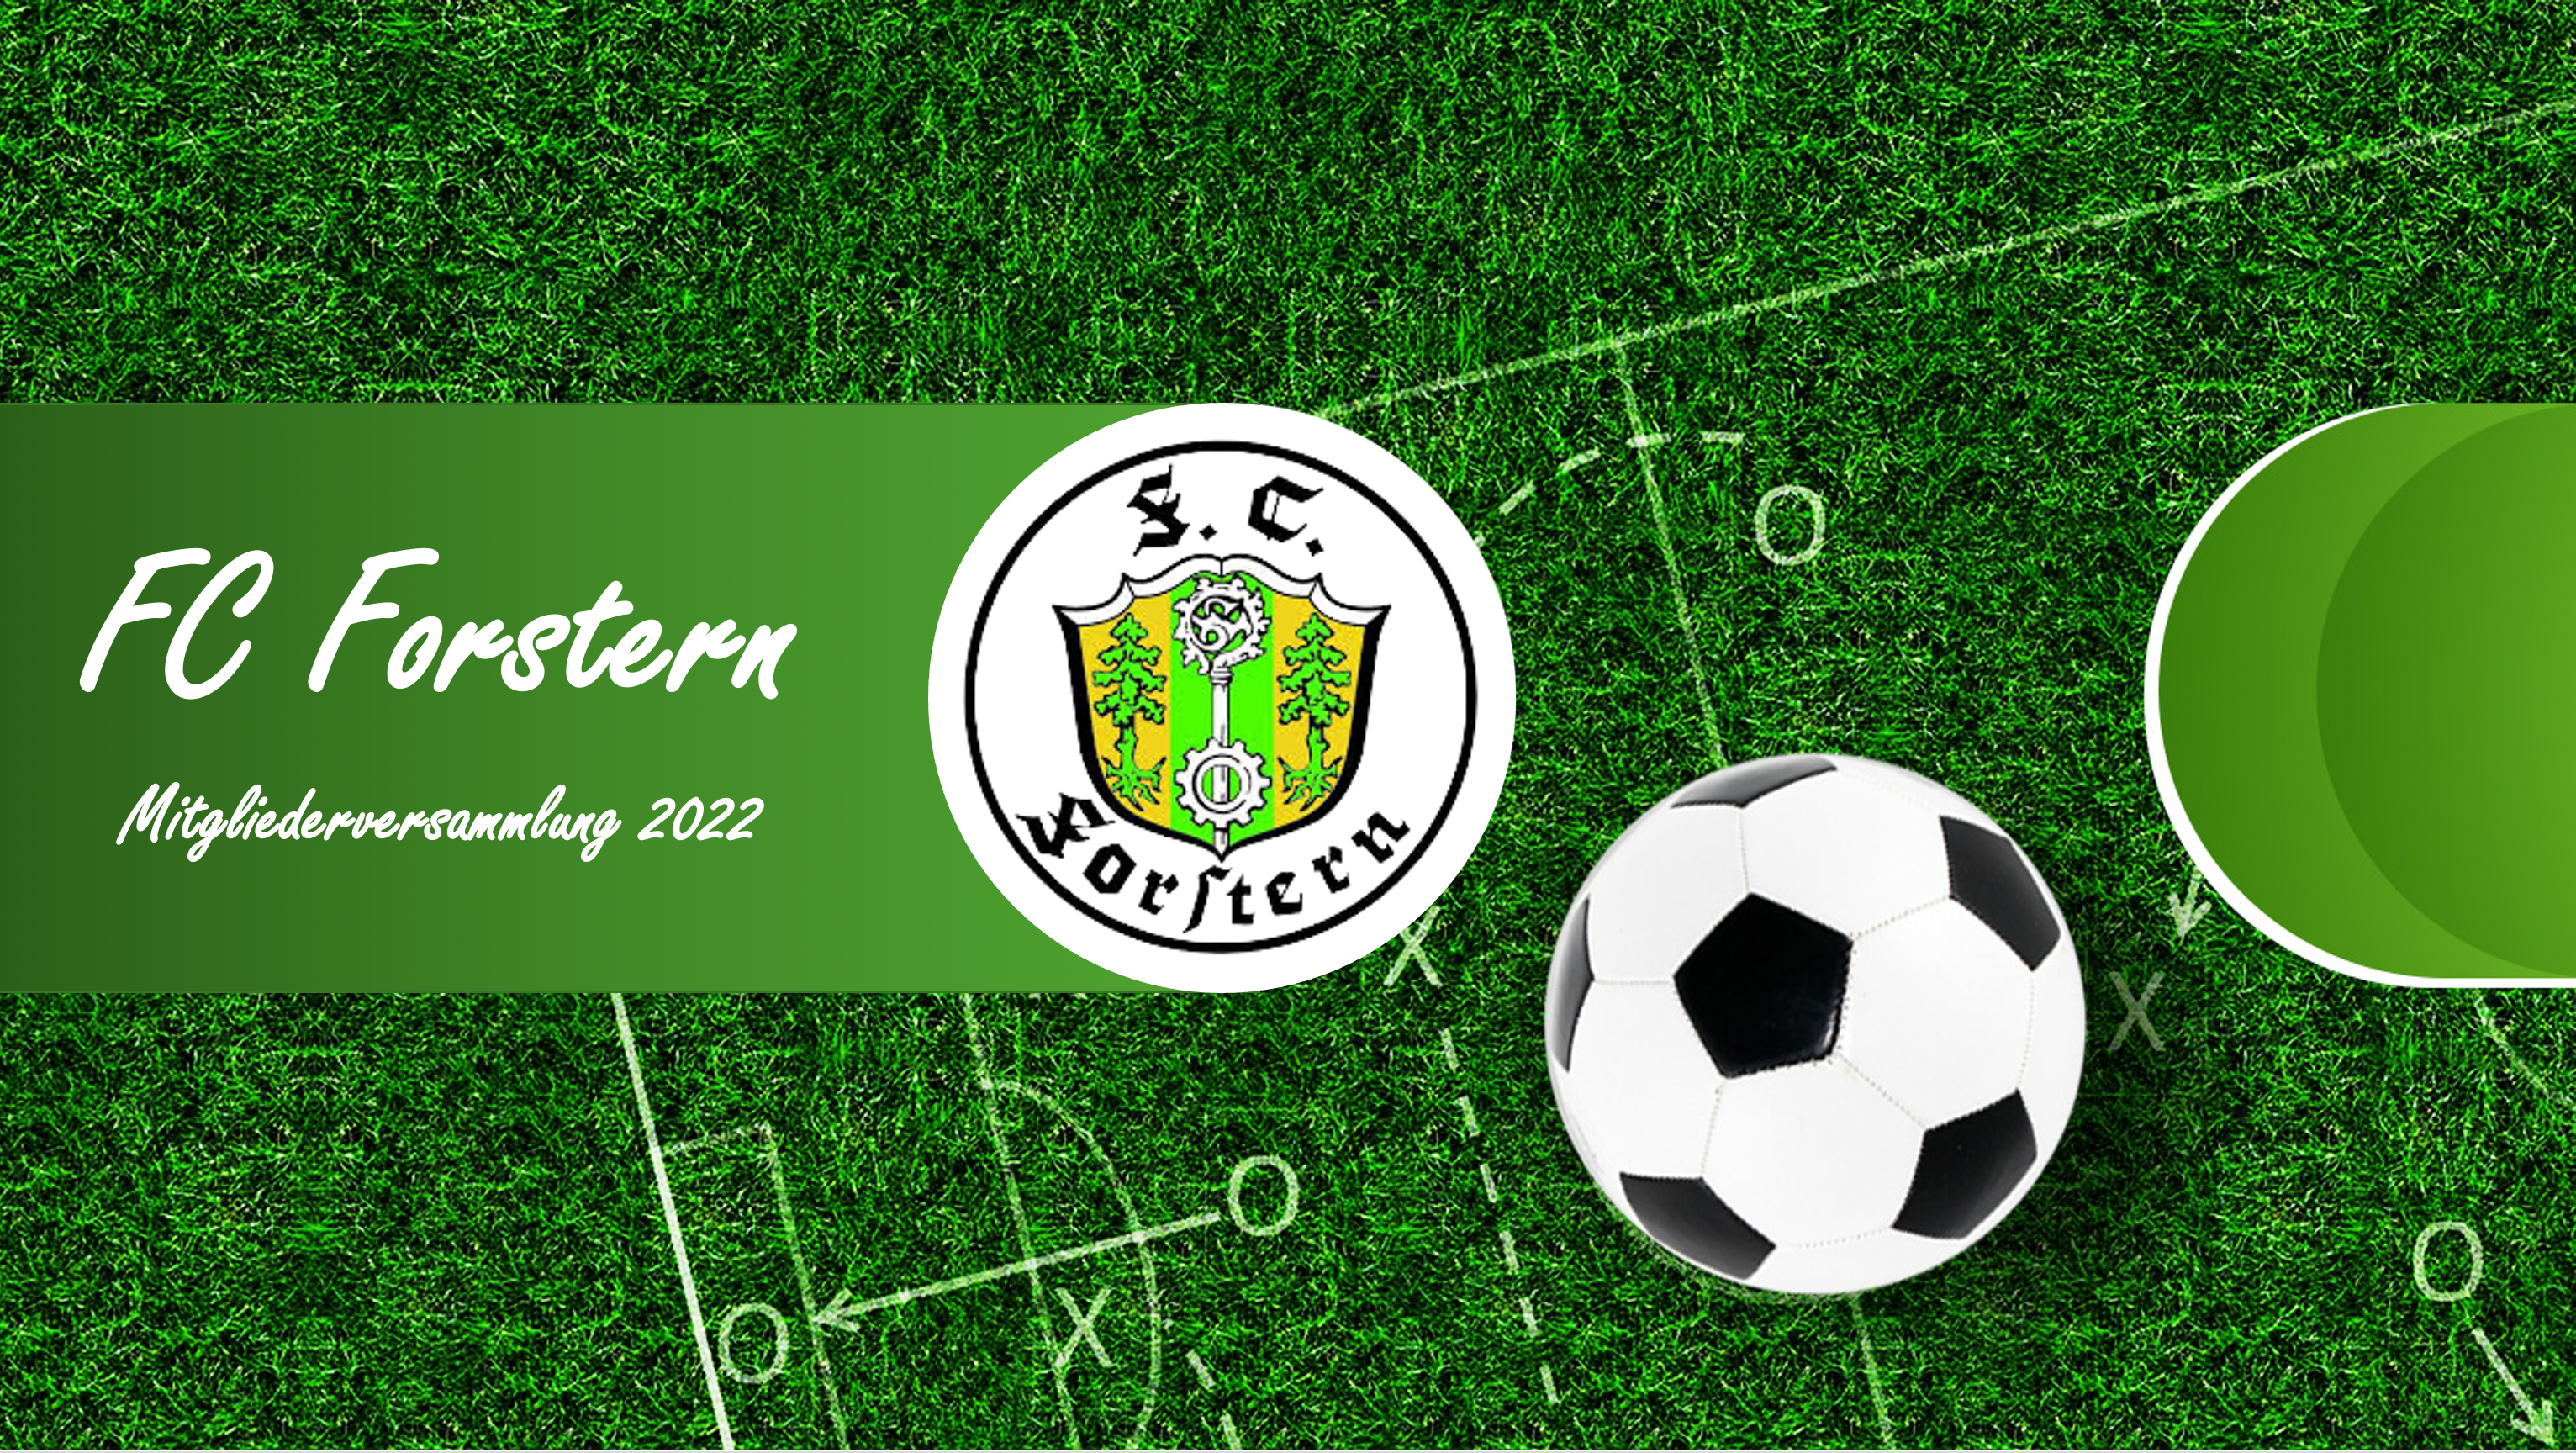 You are currently viewing FC Forstern Fußball Mitgliederversammlung 2022